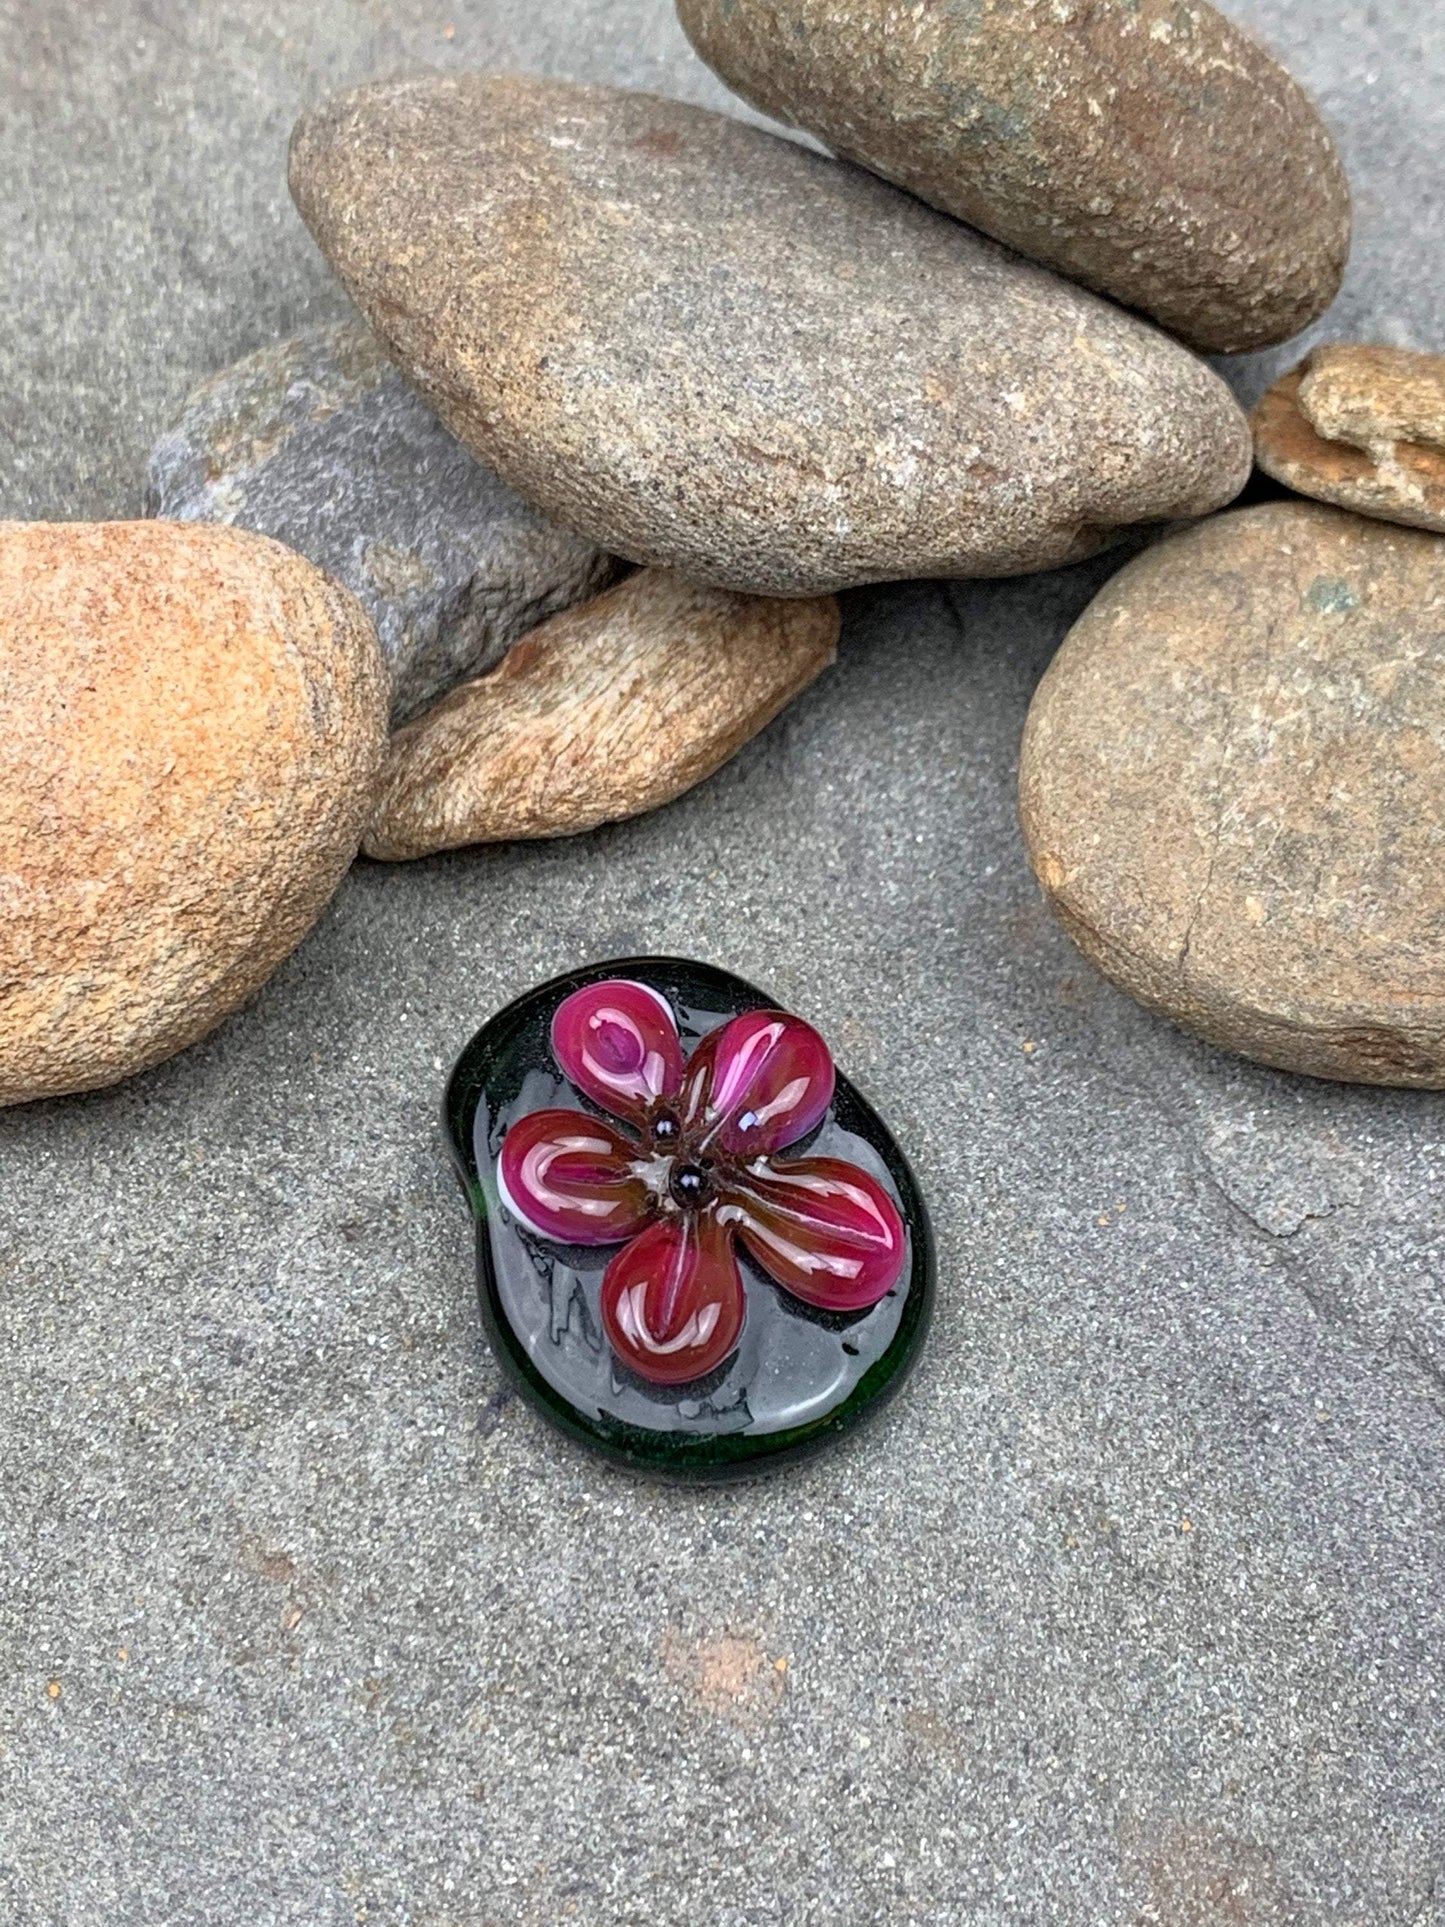 Handmade Glass Lampwork Focal Bead | Pink Flower on Green Background | One of a Kind Art Glass | Statement Bead for Pendant